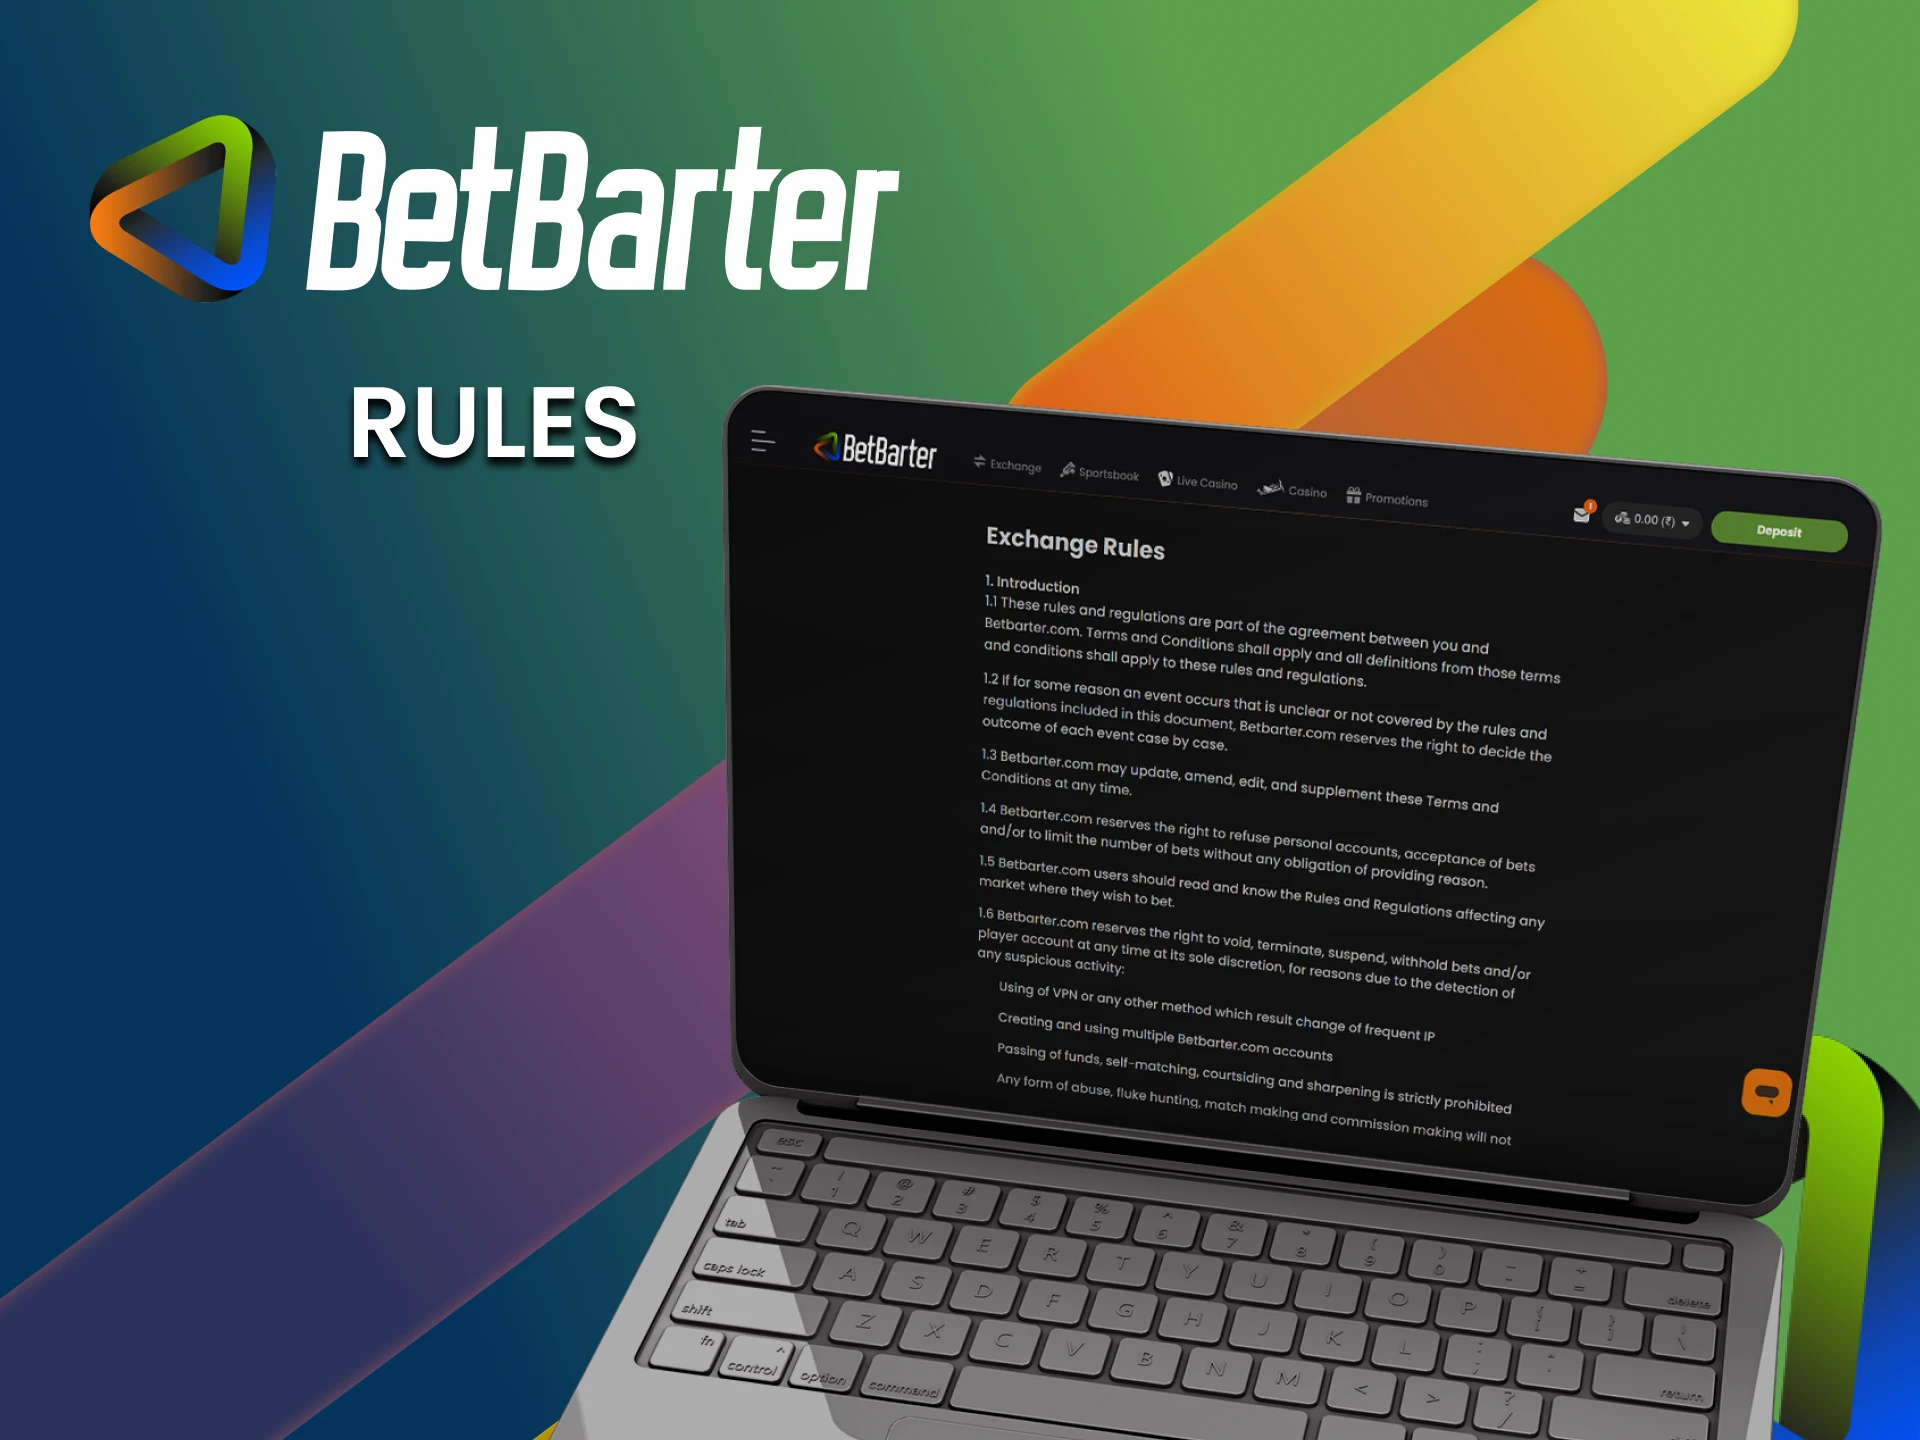 We will talk about the rules of BetBarter Exchange.